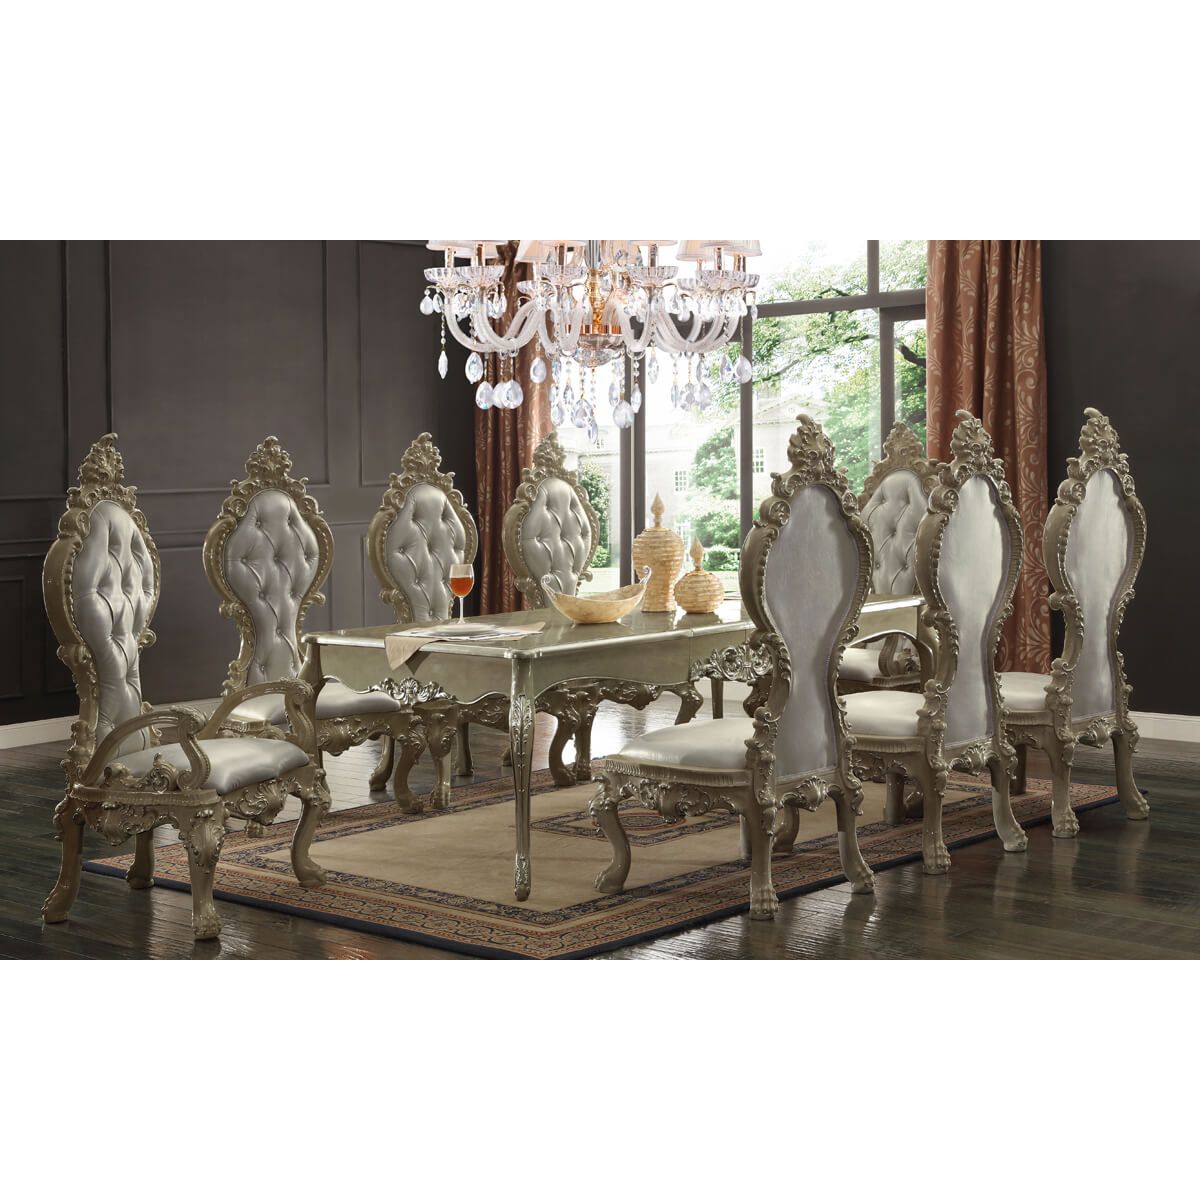 Homey Design HD-13012-G - DINING TABLE - New Star Living